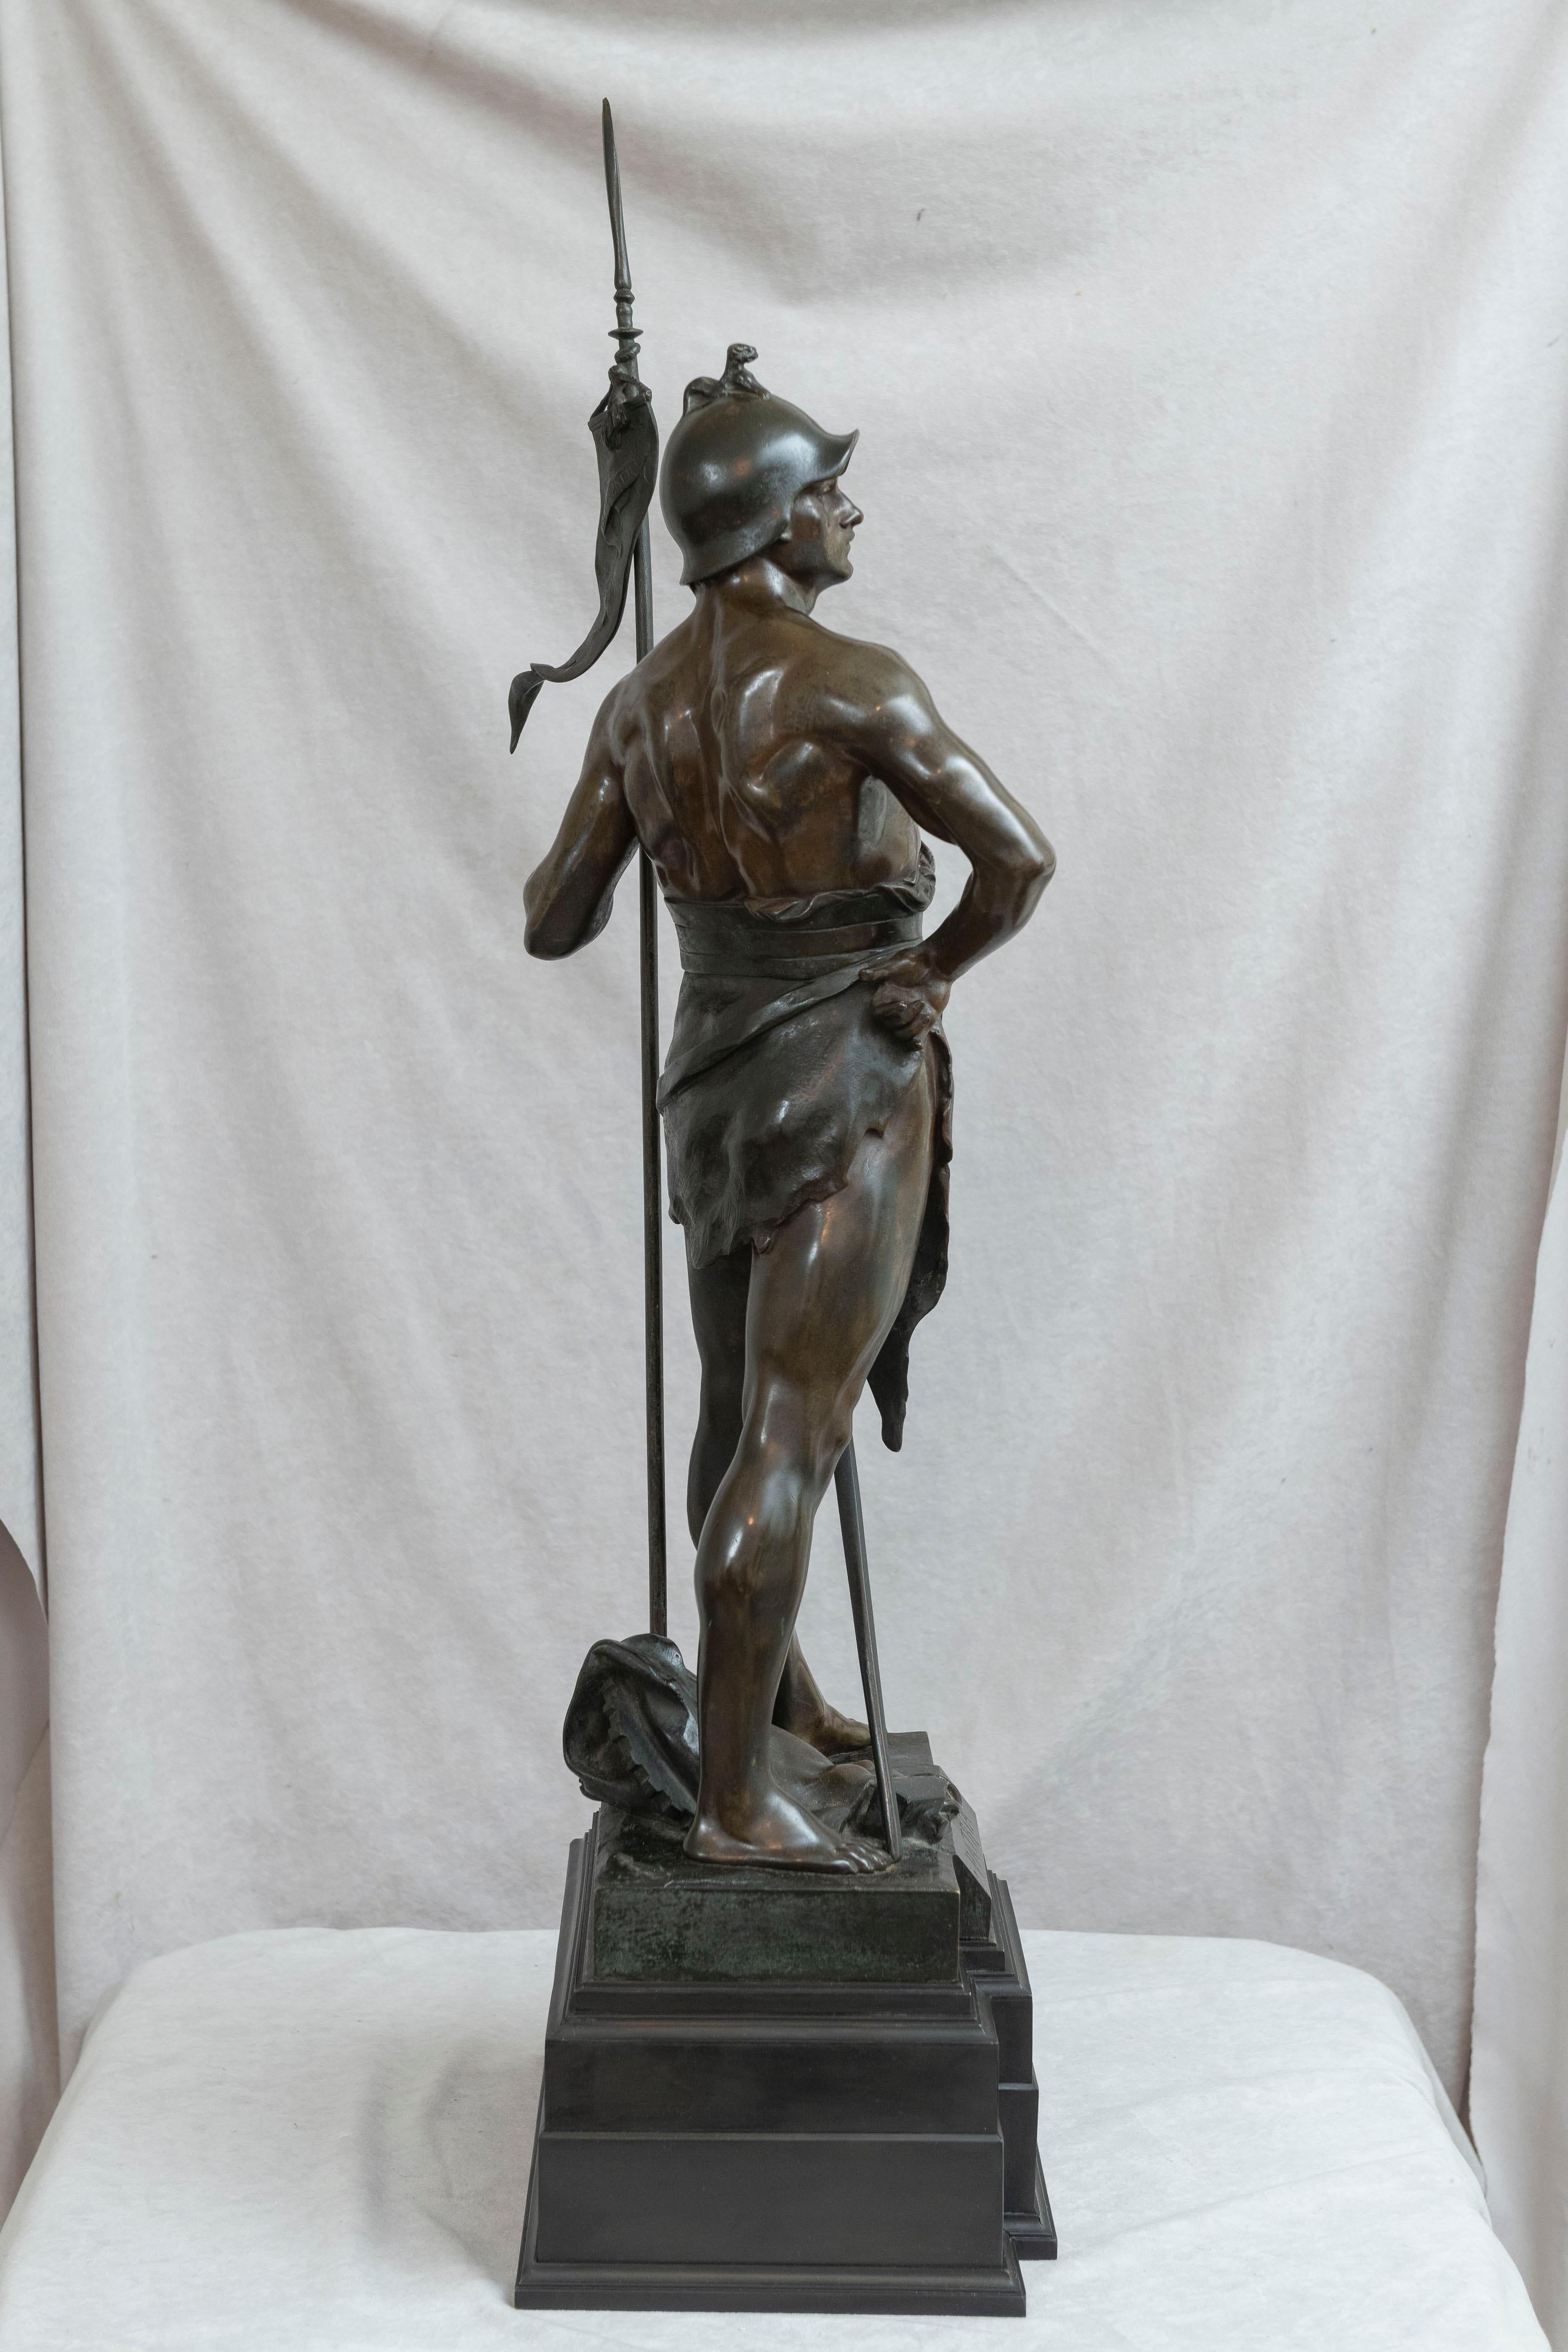 19th Century French Bronze of a Warrior, Artist Signed Picault, Titled 